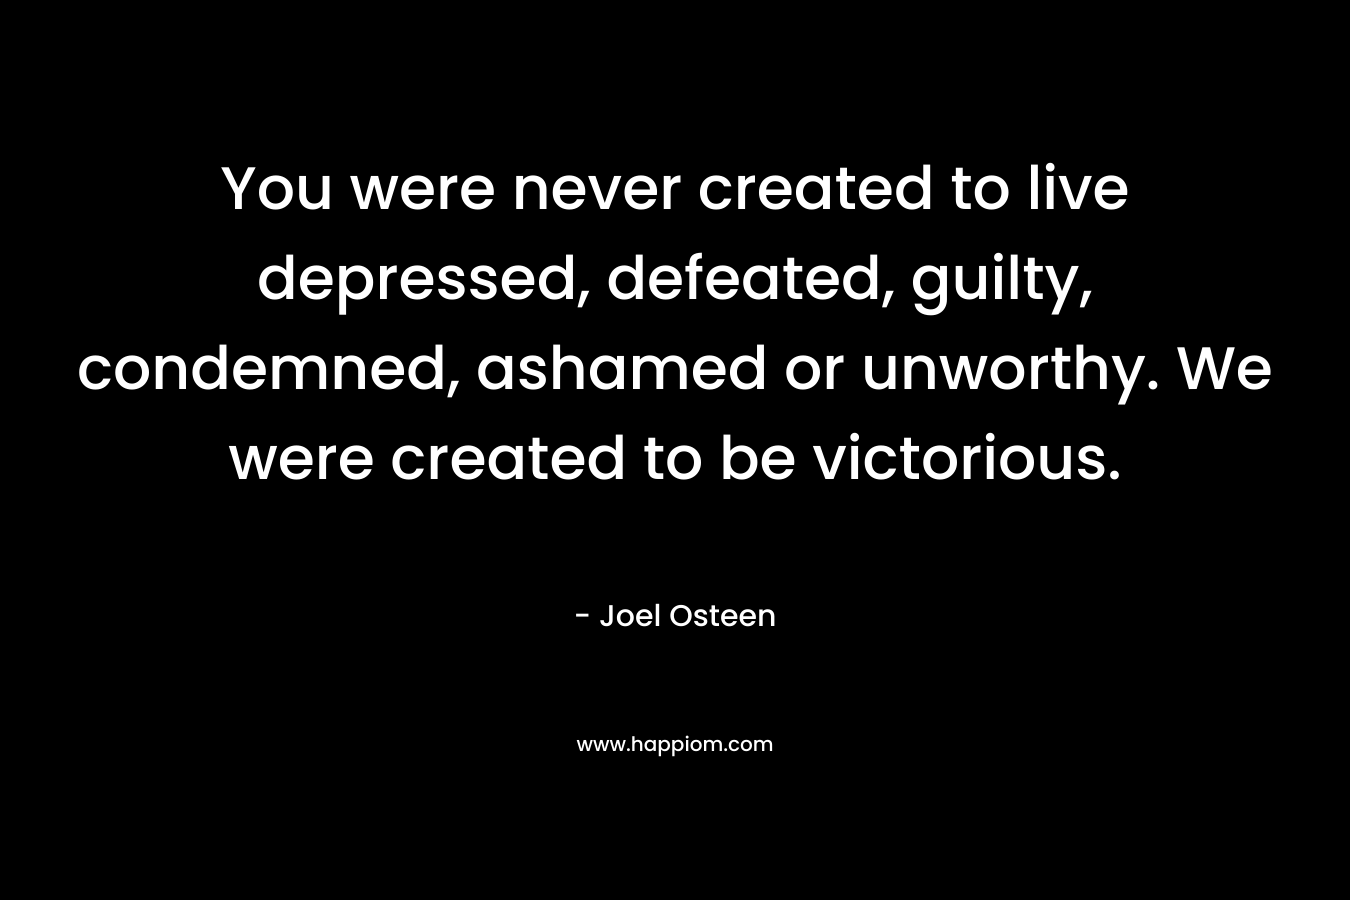 You were never created to live depressed, defeated, guilty, condemned, ashamed or unworthy. We were created to be victorious.